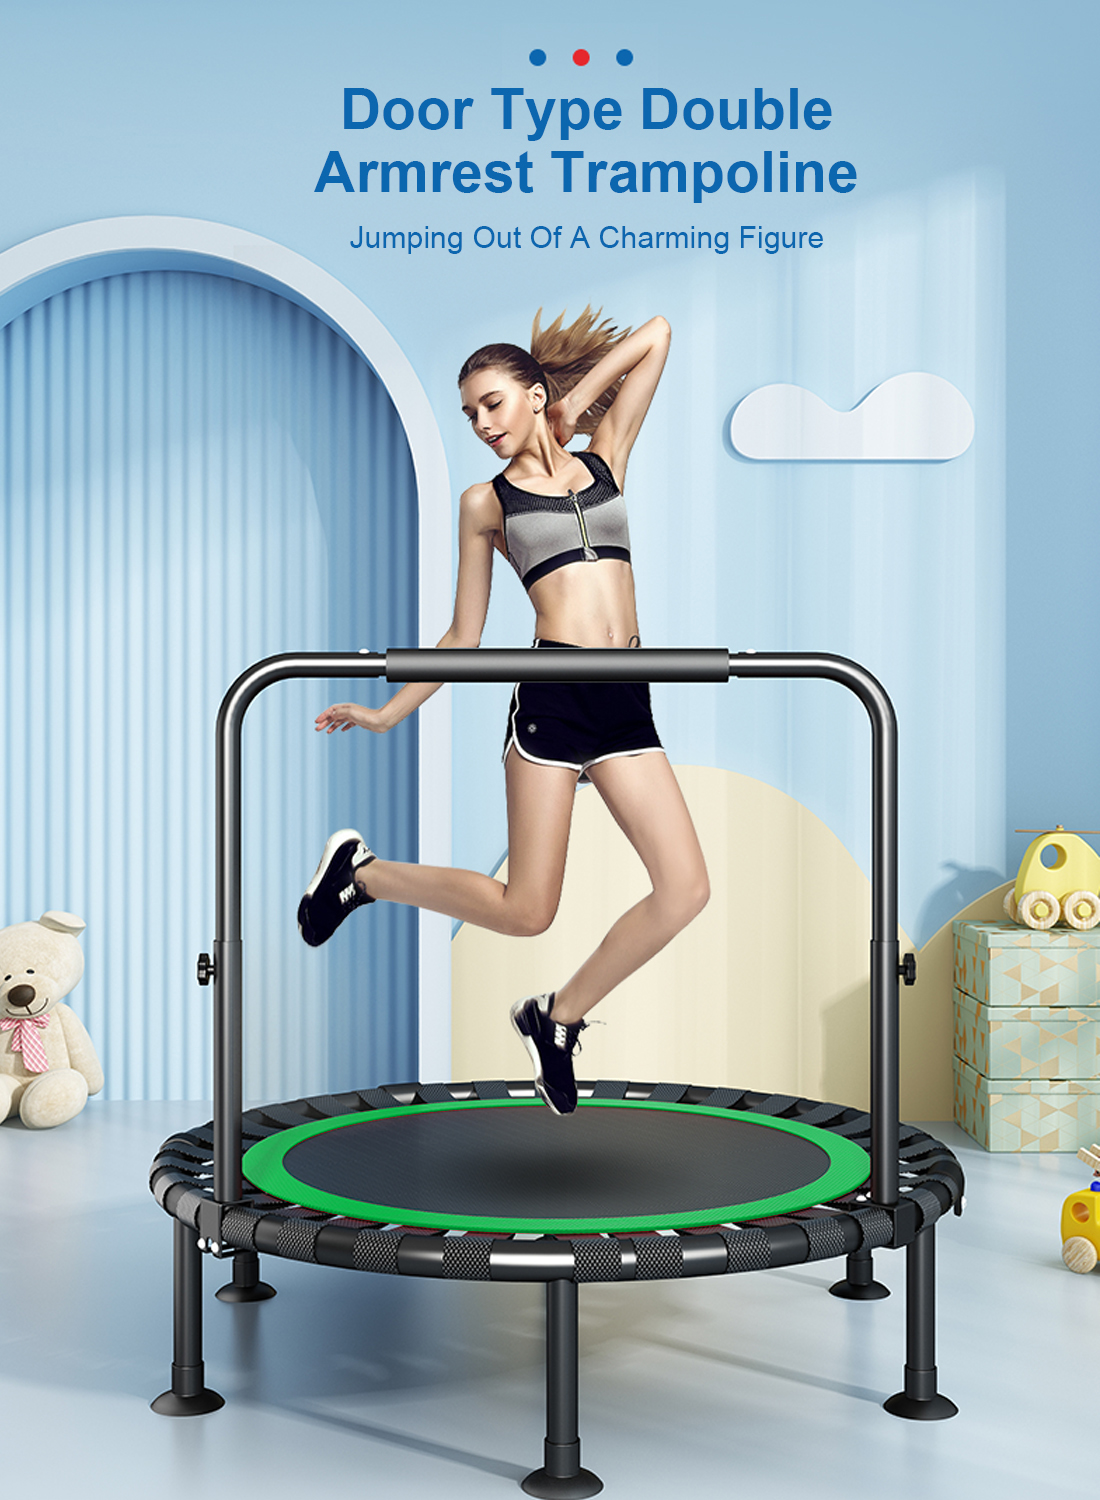 Foldable Mini Trampoline, 40 inches Fitness Trampoline with Bungees, U Shape Adjustable Foam Handle